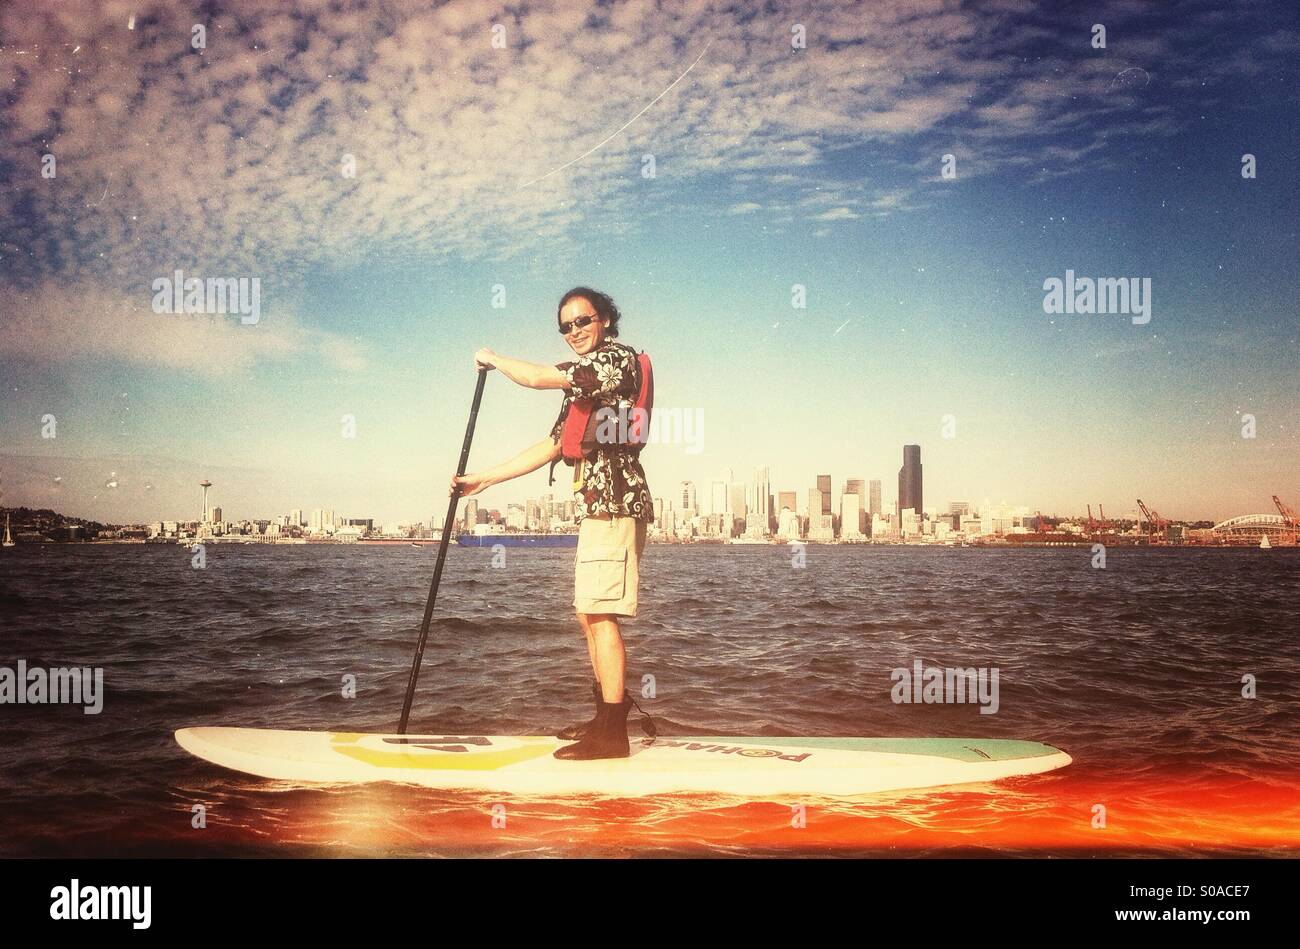 Man on paddle board in front of Seattle skyline Stock Photo